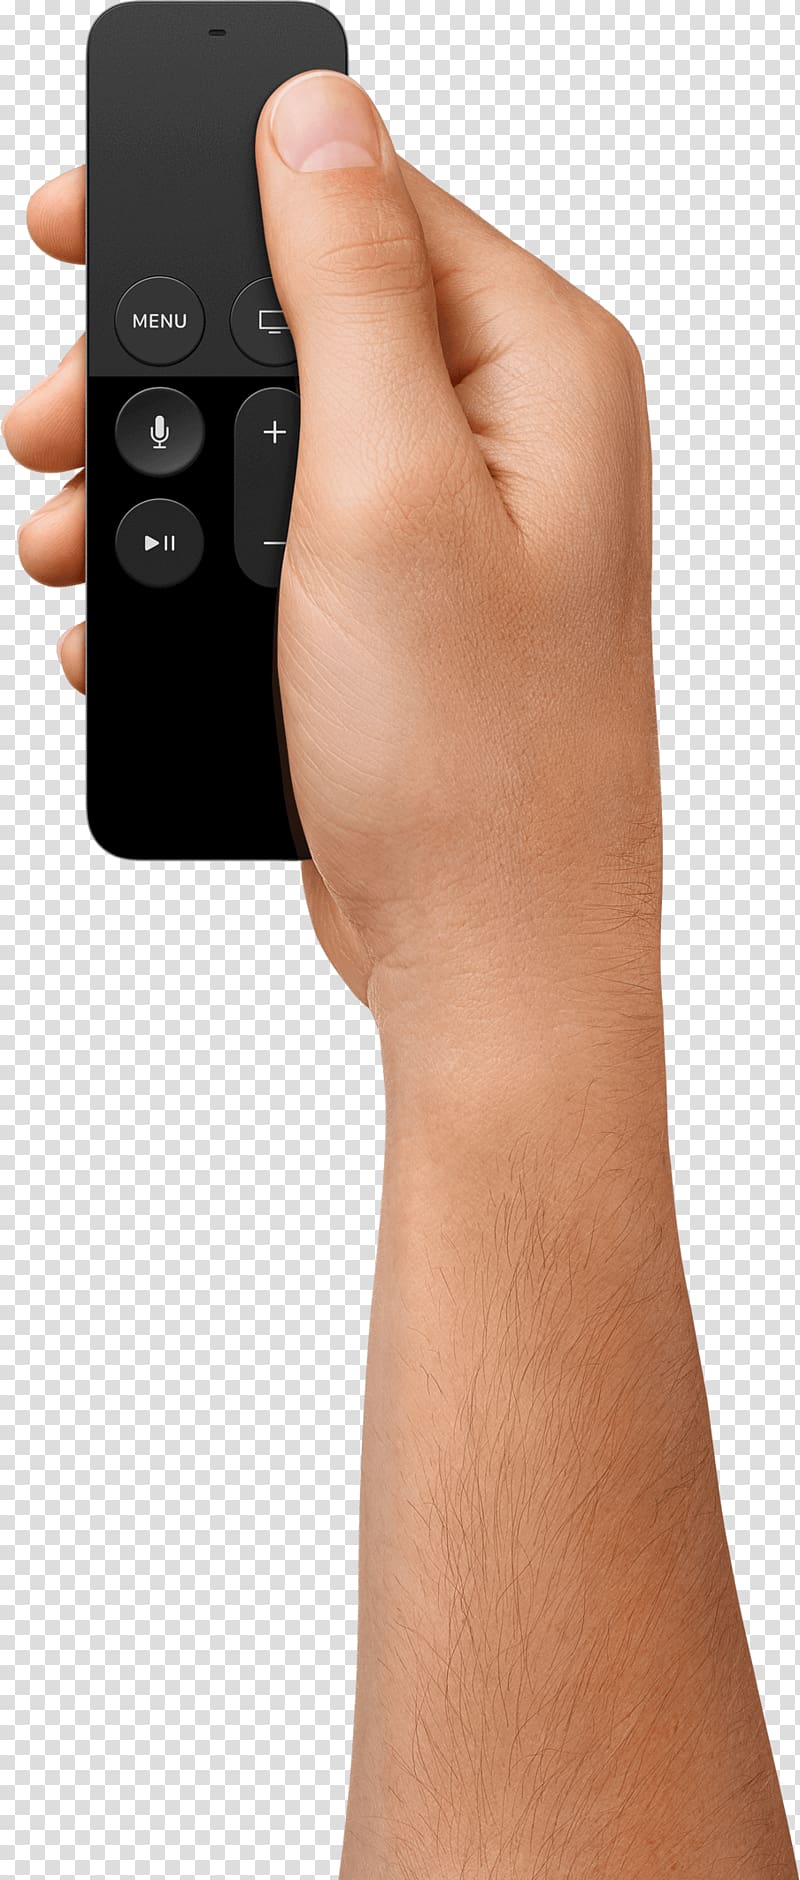 iPod touch MacBook Pro Apple TV Siri Remote Remote Controls, apple transparent background PNG clipart